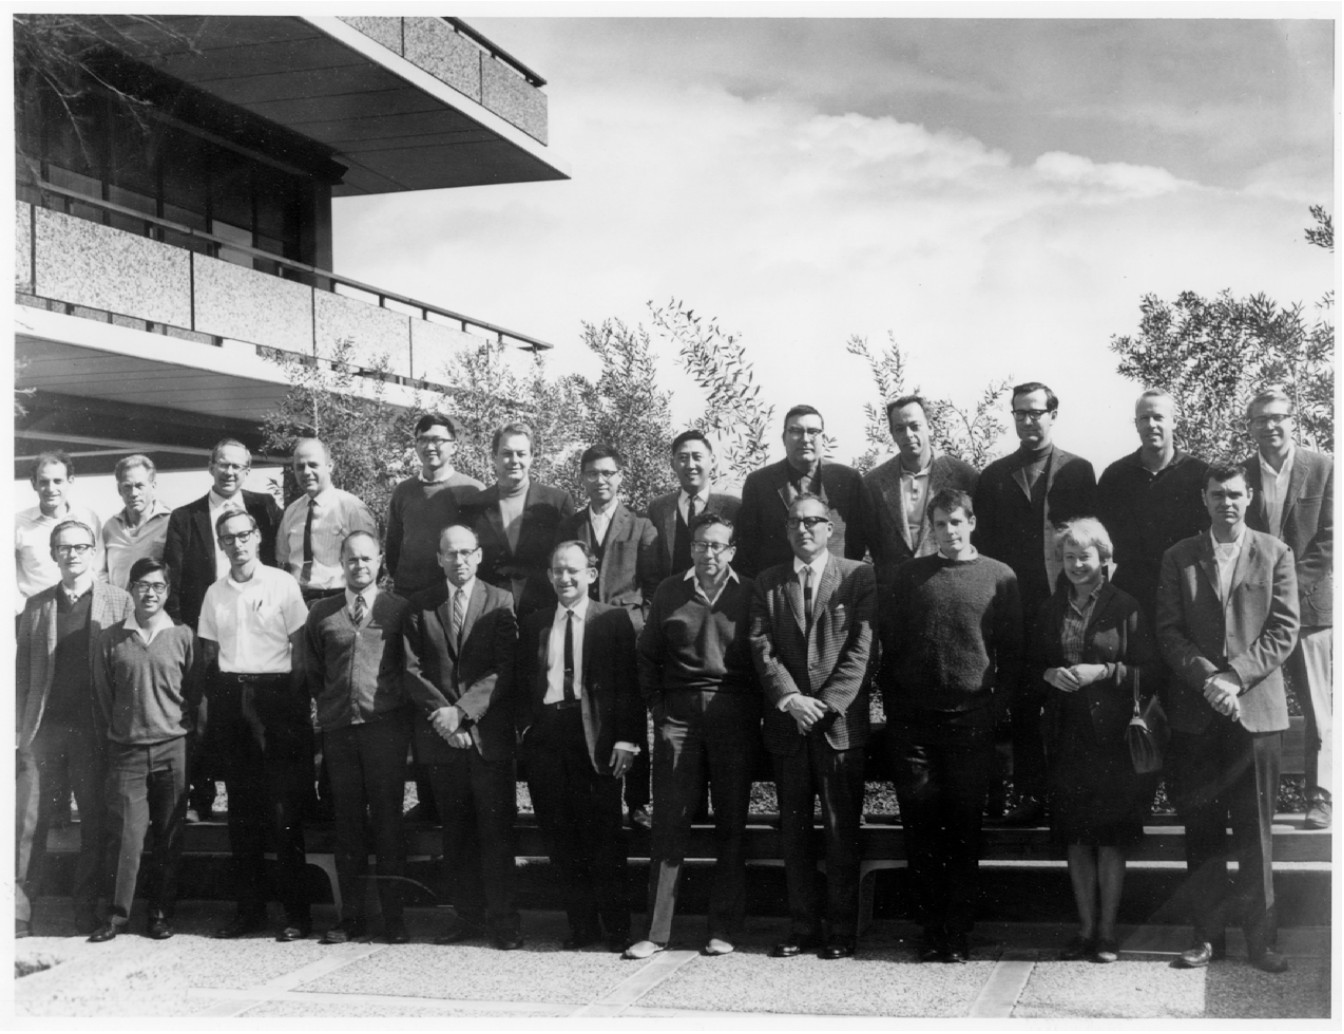 Image of the founding faculty of the UC San Diego Department of Physics.